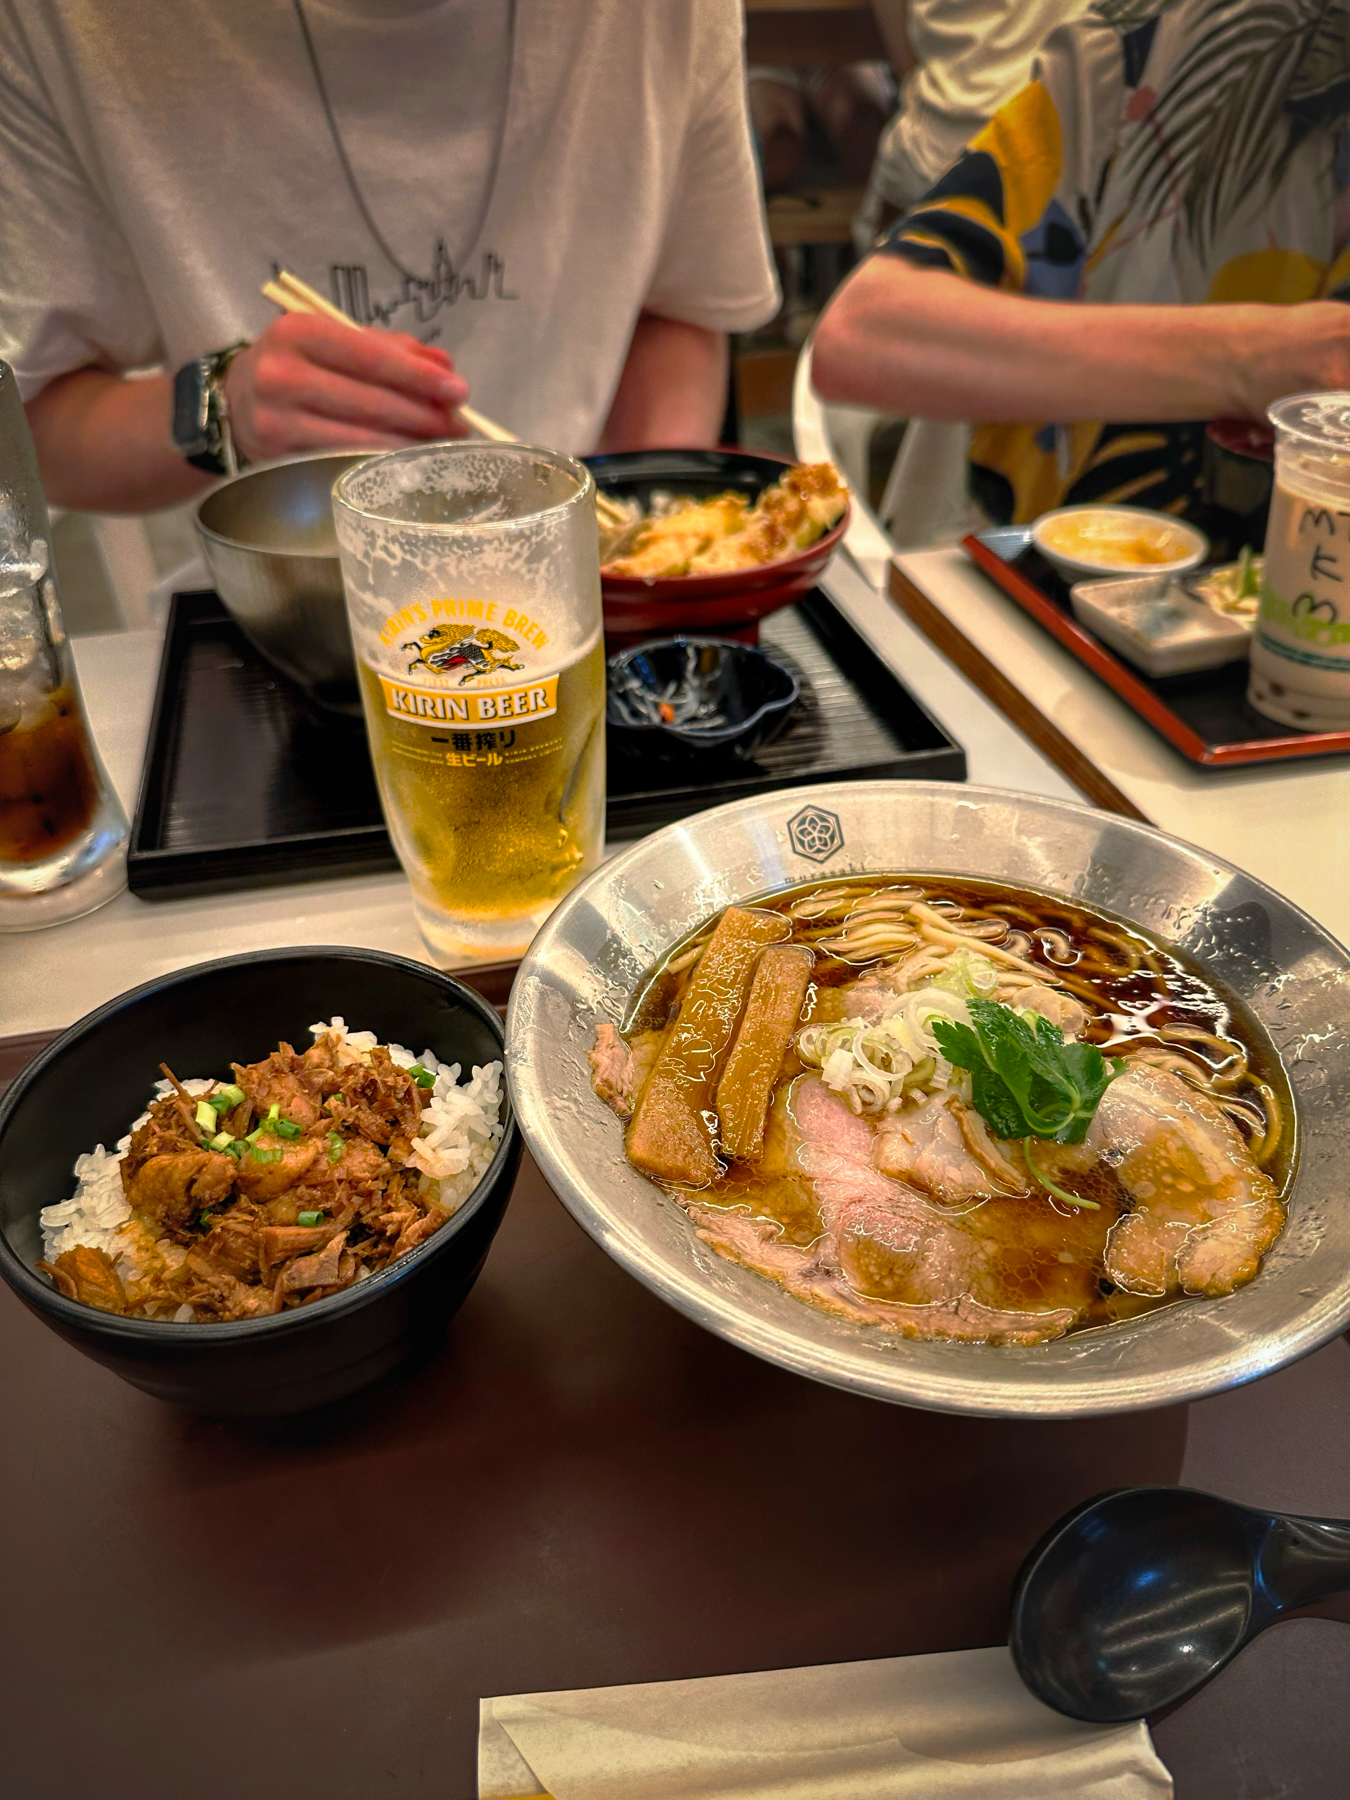 A table in a restaurant with Japanese dishes, including a bowl of ramen with sliced pork and a rice bowl with beef topping. There is also a glass of Kirin beer and two people dining in the background.